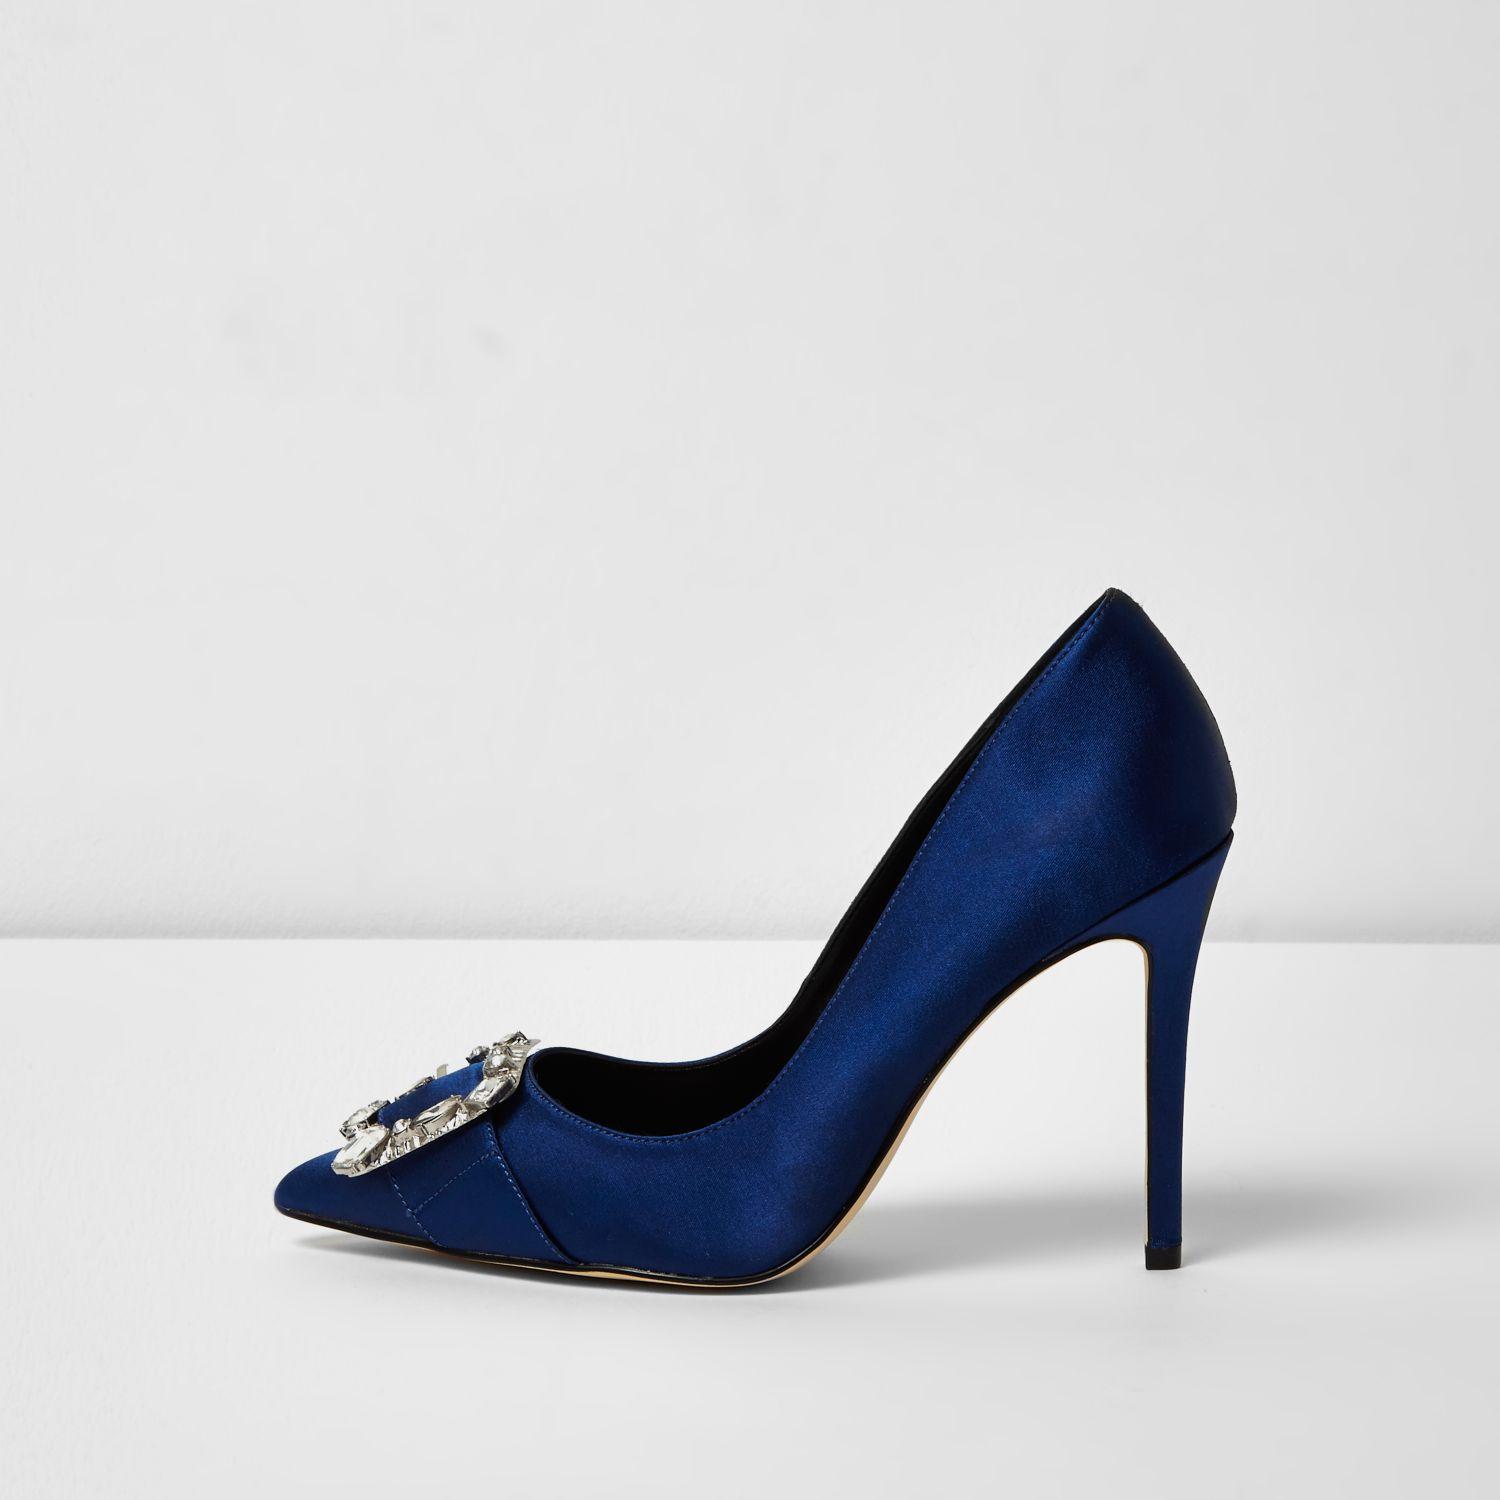 River Island Navy Satin Buckle Court Shoes in Blue - Lyst